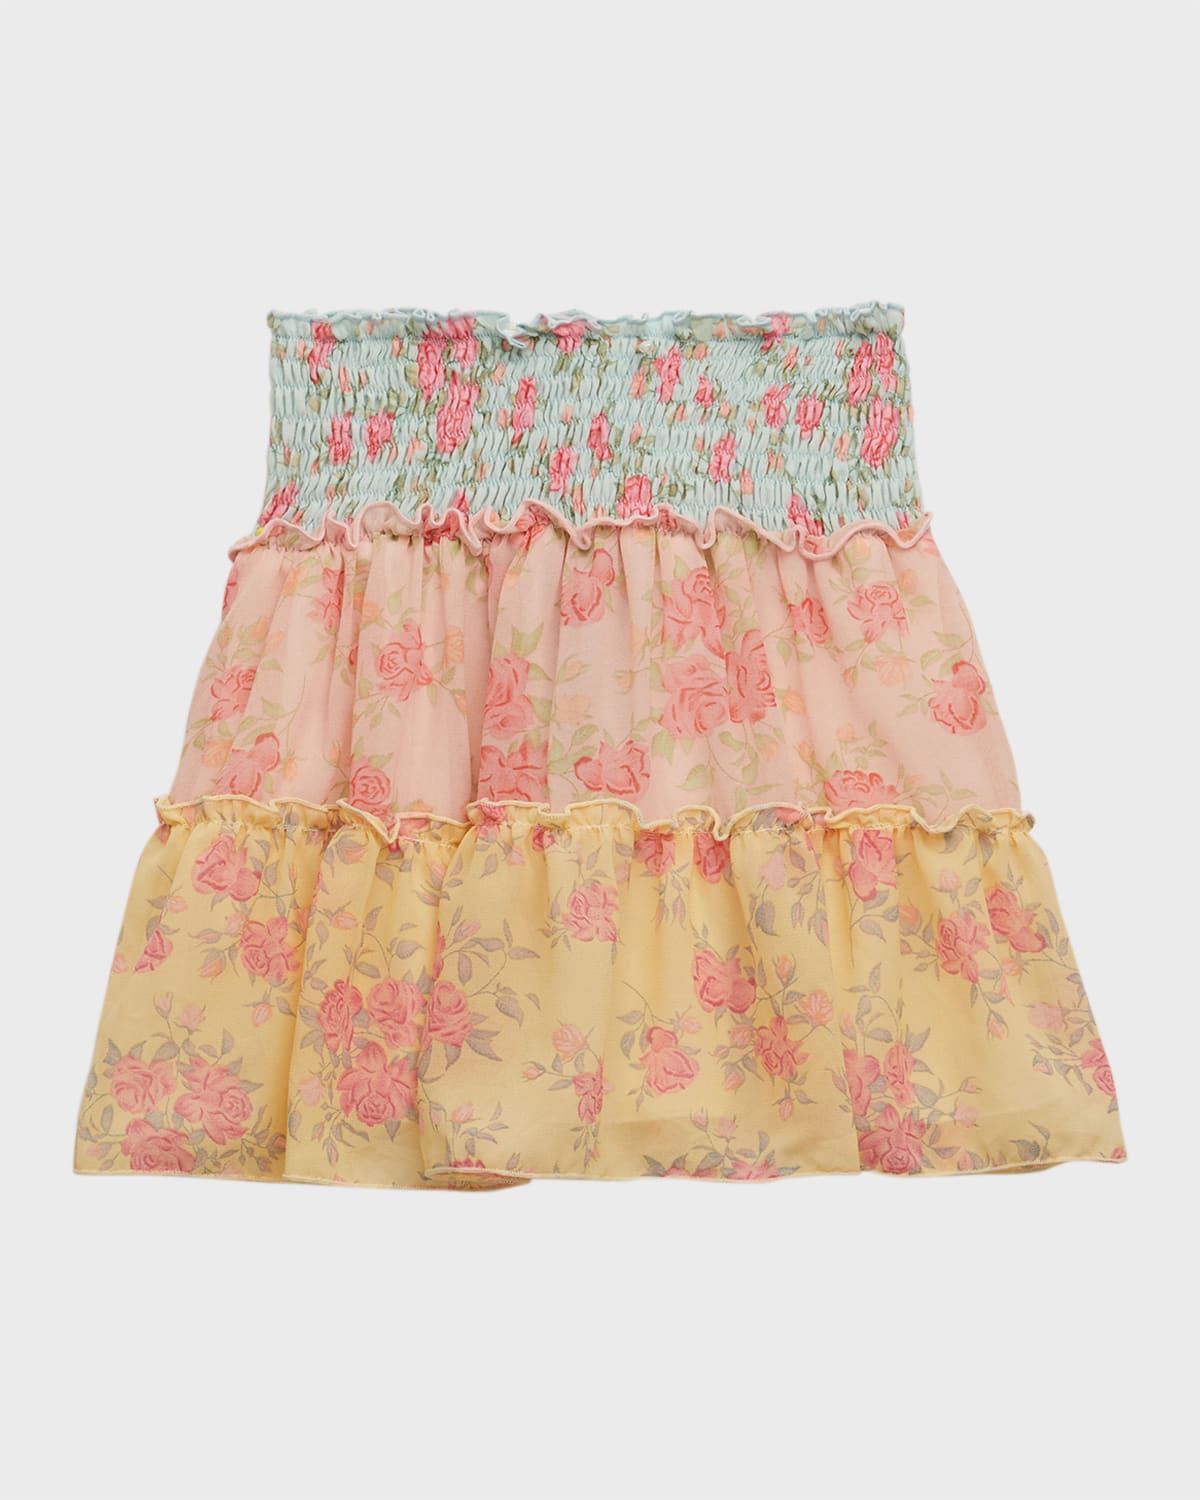 Girl's Multicolor Floral-Print Skirt, Size S-XL